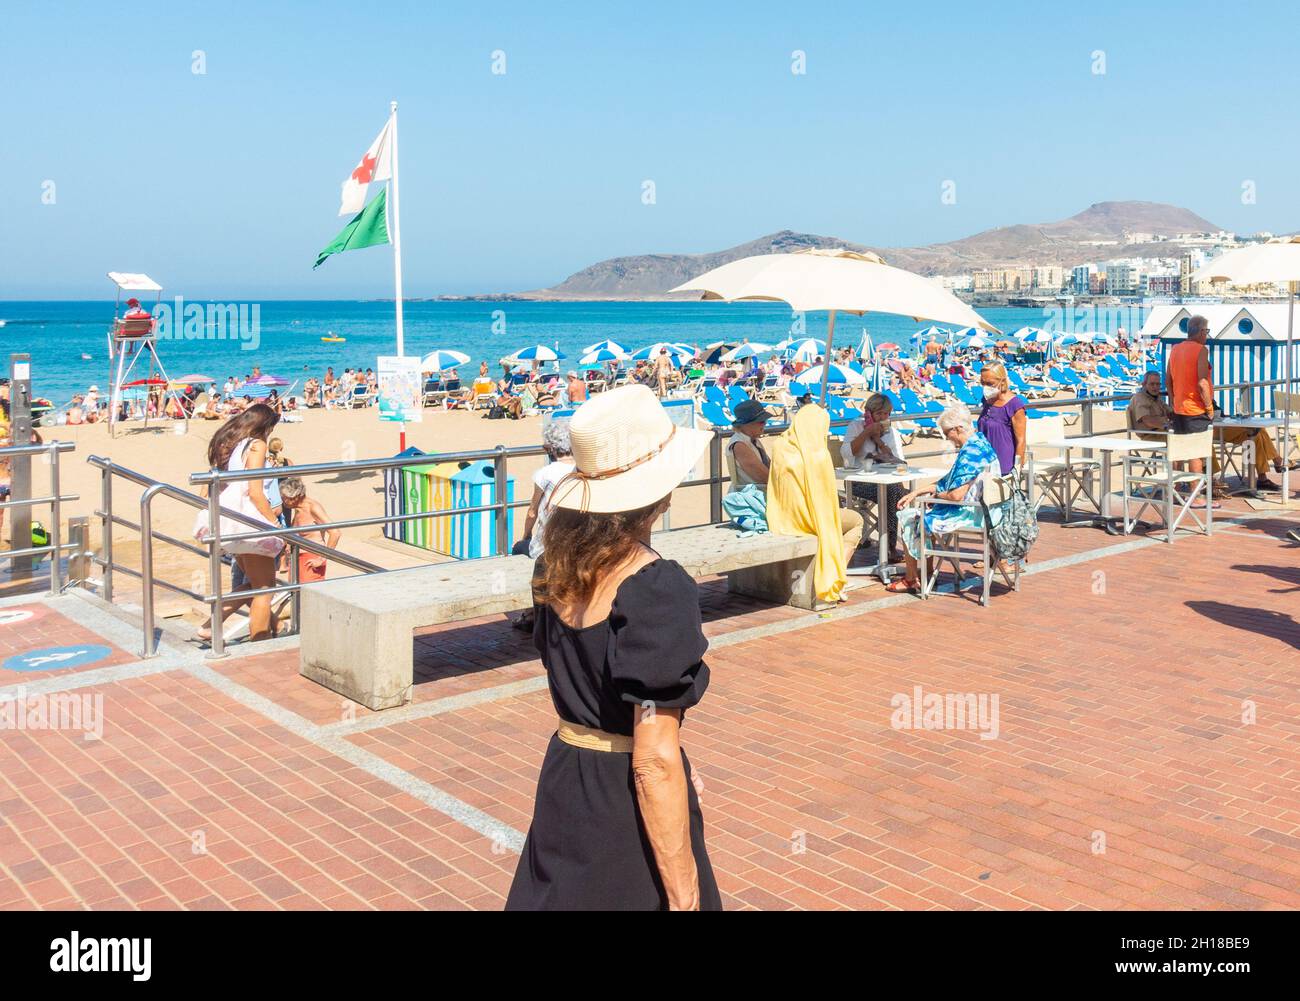 Gran Canaria, Canary Islands, Spain. 17th October, 2021. Tourists, many from the UK, enjoying a 30 degrees Celsius day on the city beach in Las Palmas, the capital of Gran Canaria; a popular half term holiday destination for many from the UK. Credit: Alan Dawson/Alamy Live News. Stock Photo